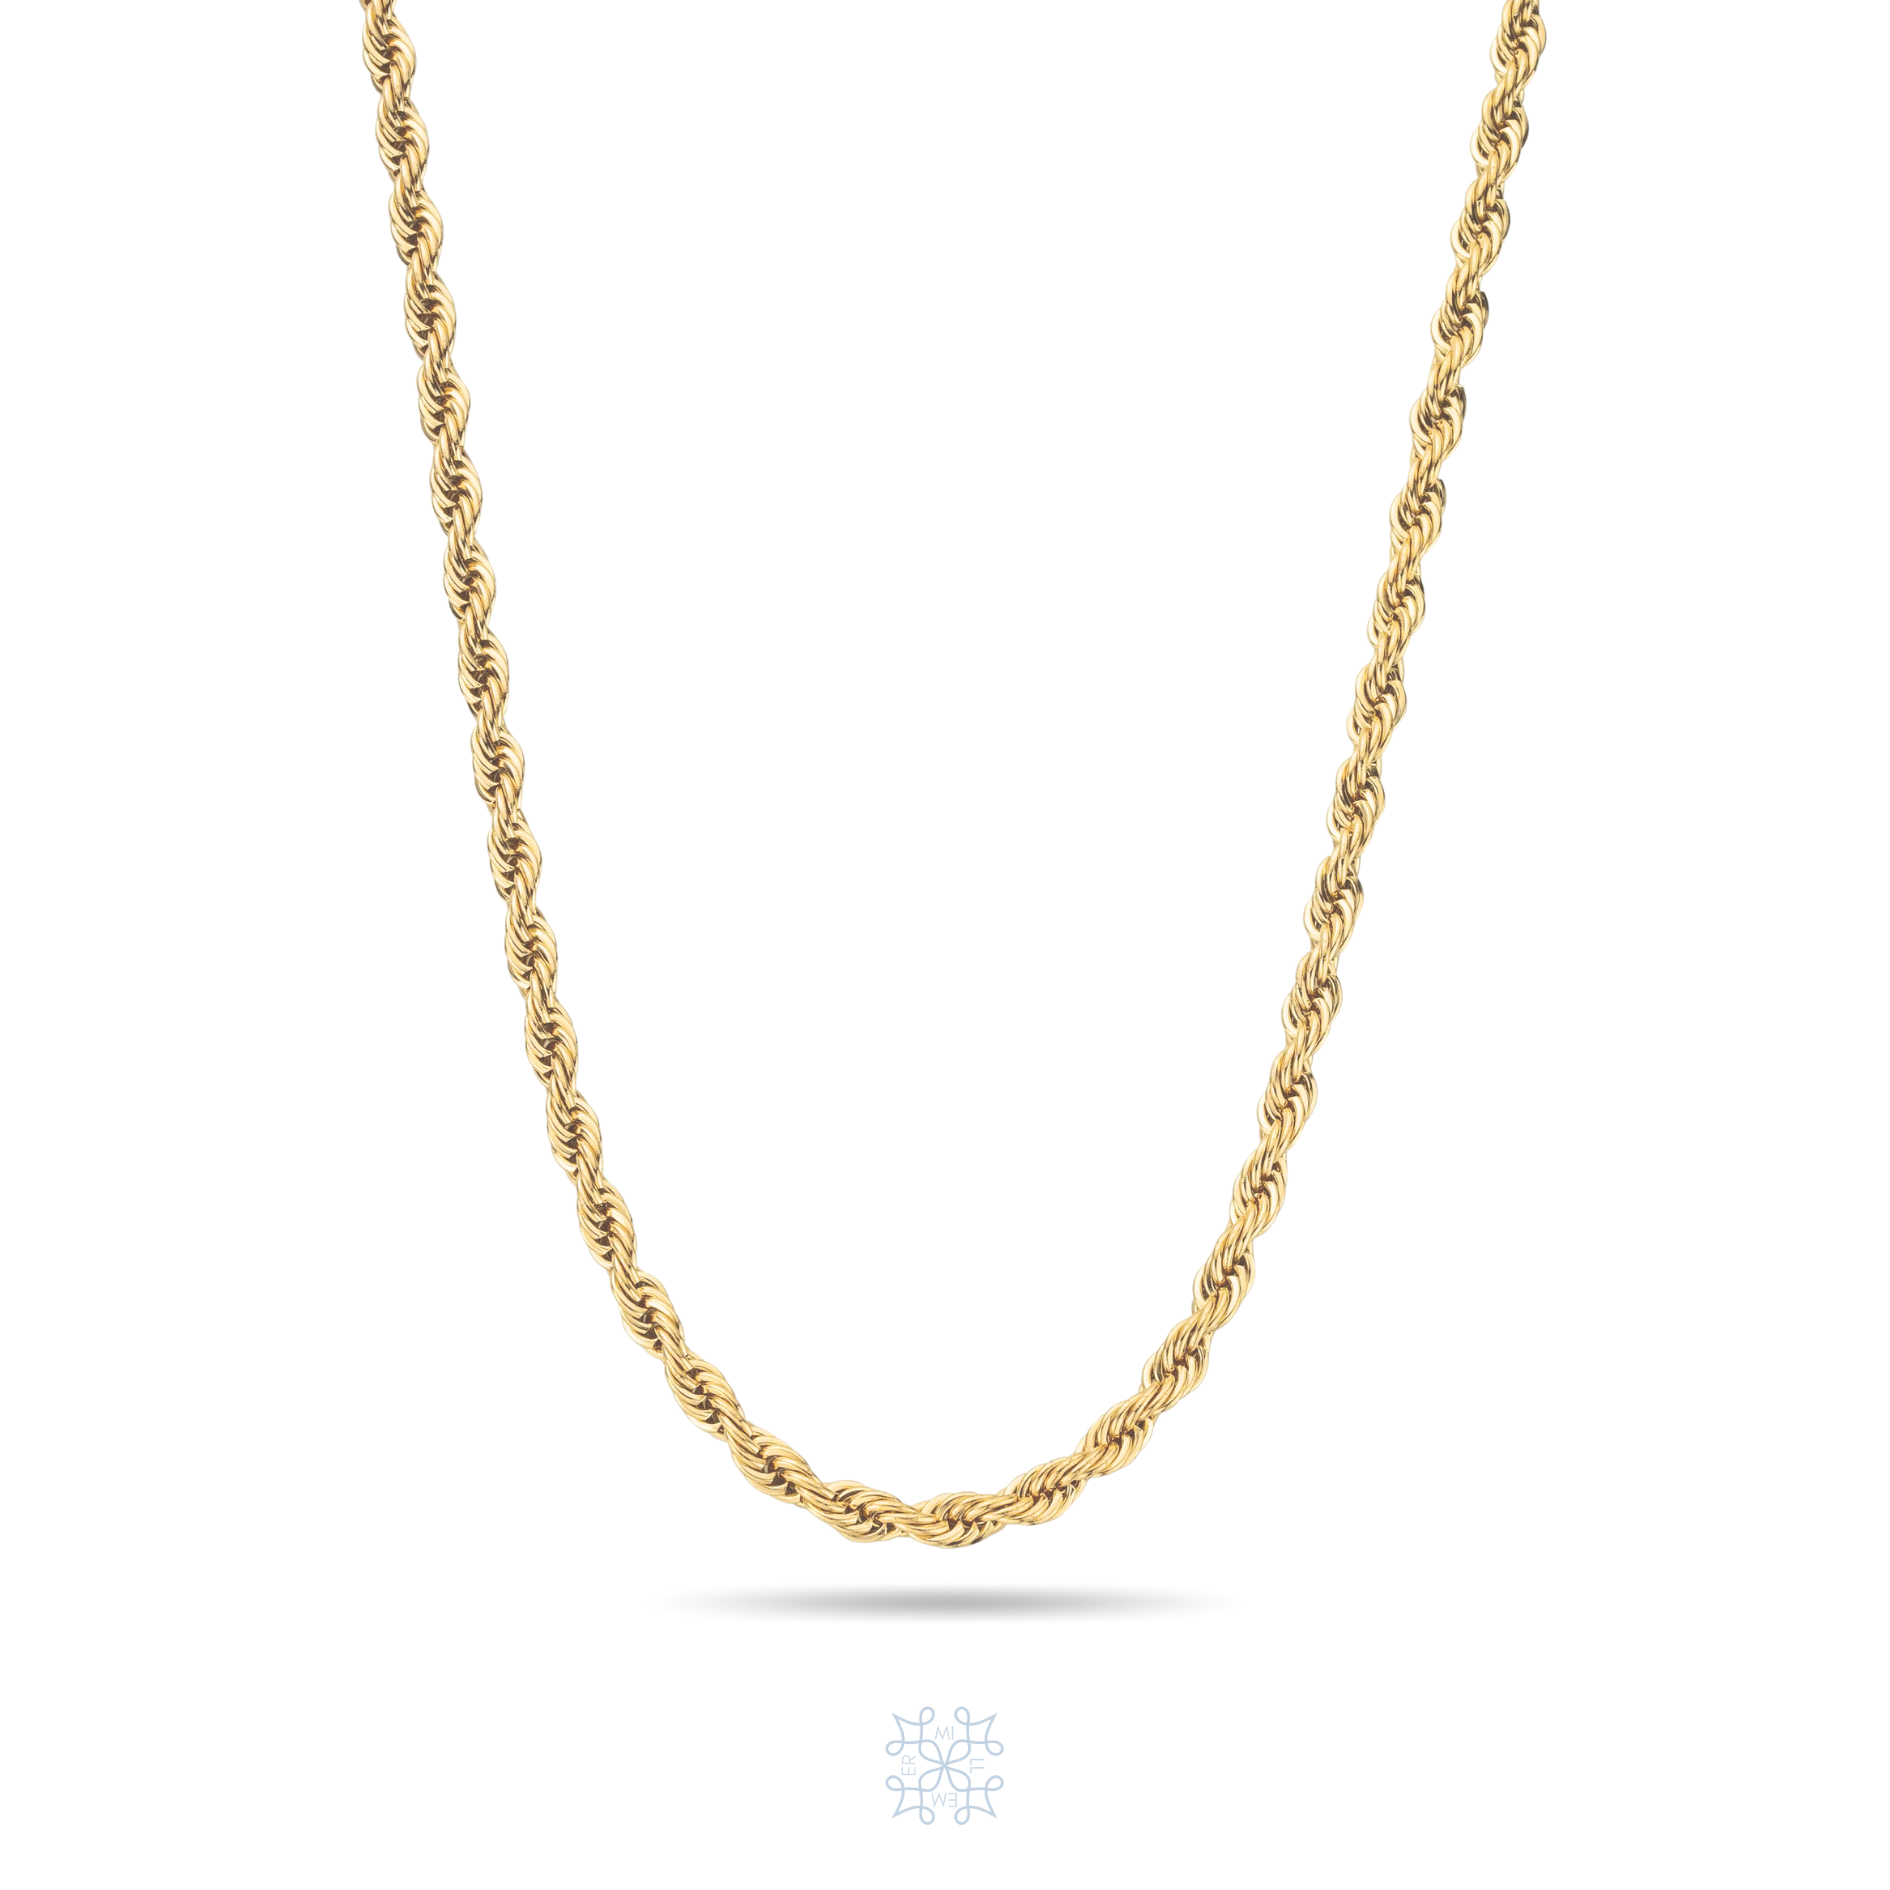 Gold chain in the texture of a rope. Robe B Chain Necklace. 